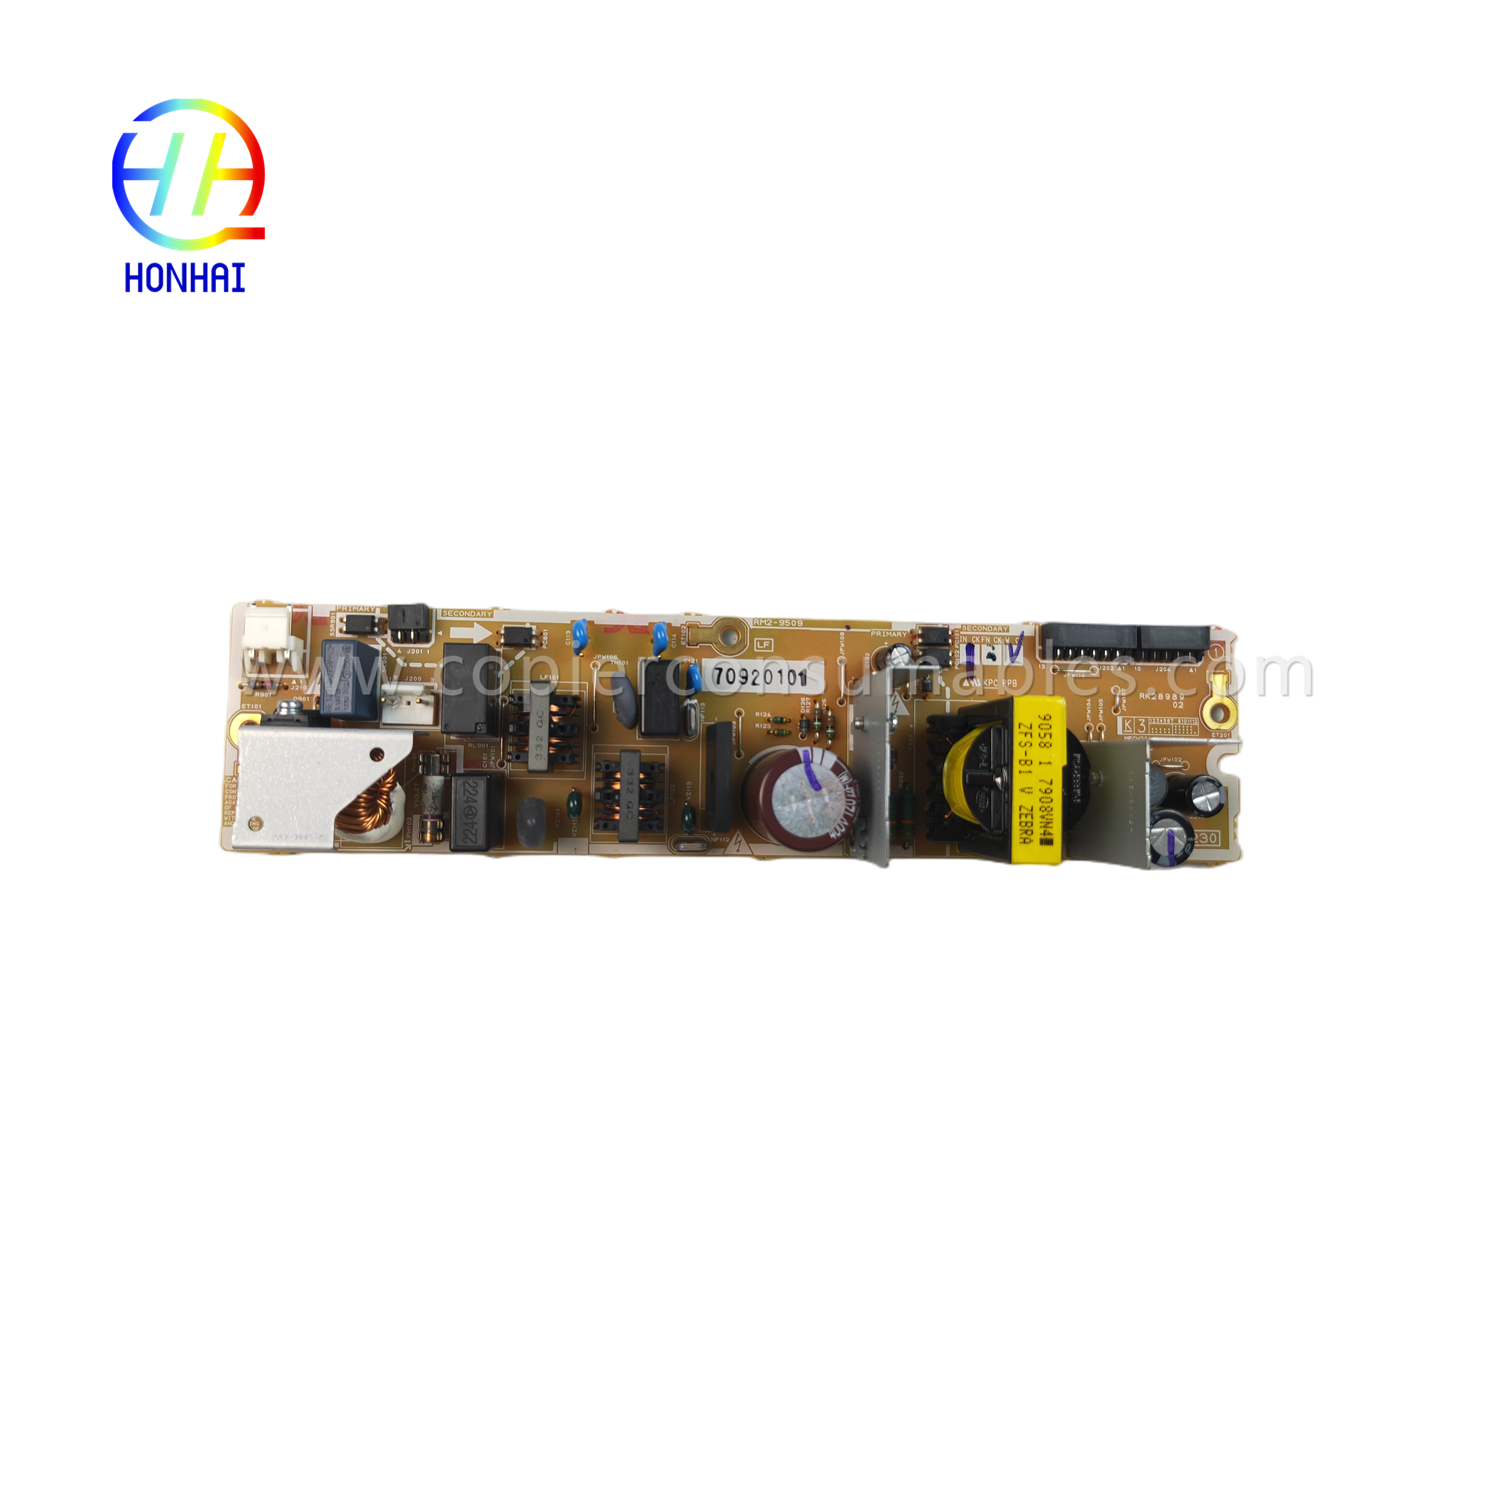 https://www.copierconsumables.com/power-supply-220v-for-hp-color-laserjet-pro-mfp-m283fdw-rm2-2428-ምርት/